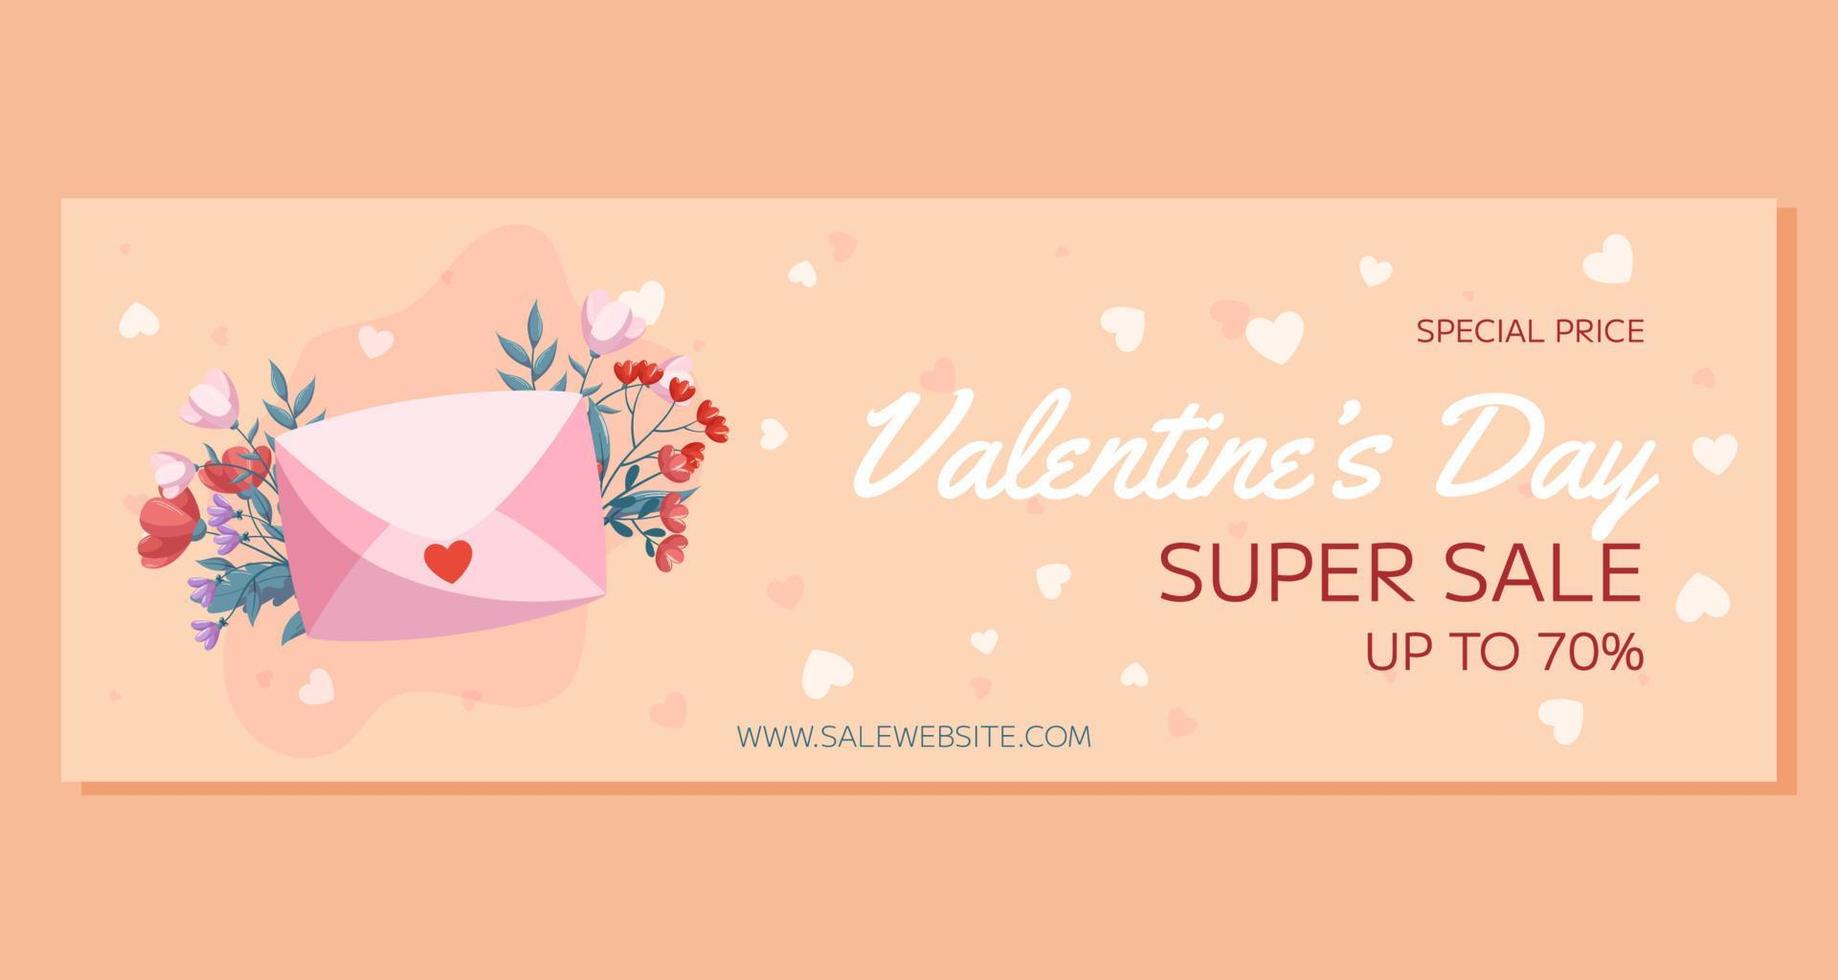 St. Valentine's Day horizontal Super Sale banner template design. Pink closed envelop, red and pink flowers green leaves on beige backdrop. Special Price online shopping vector